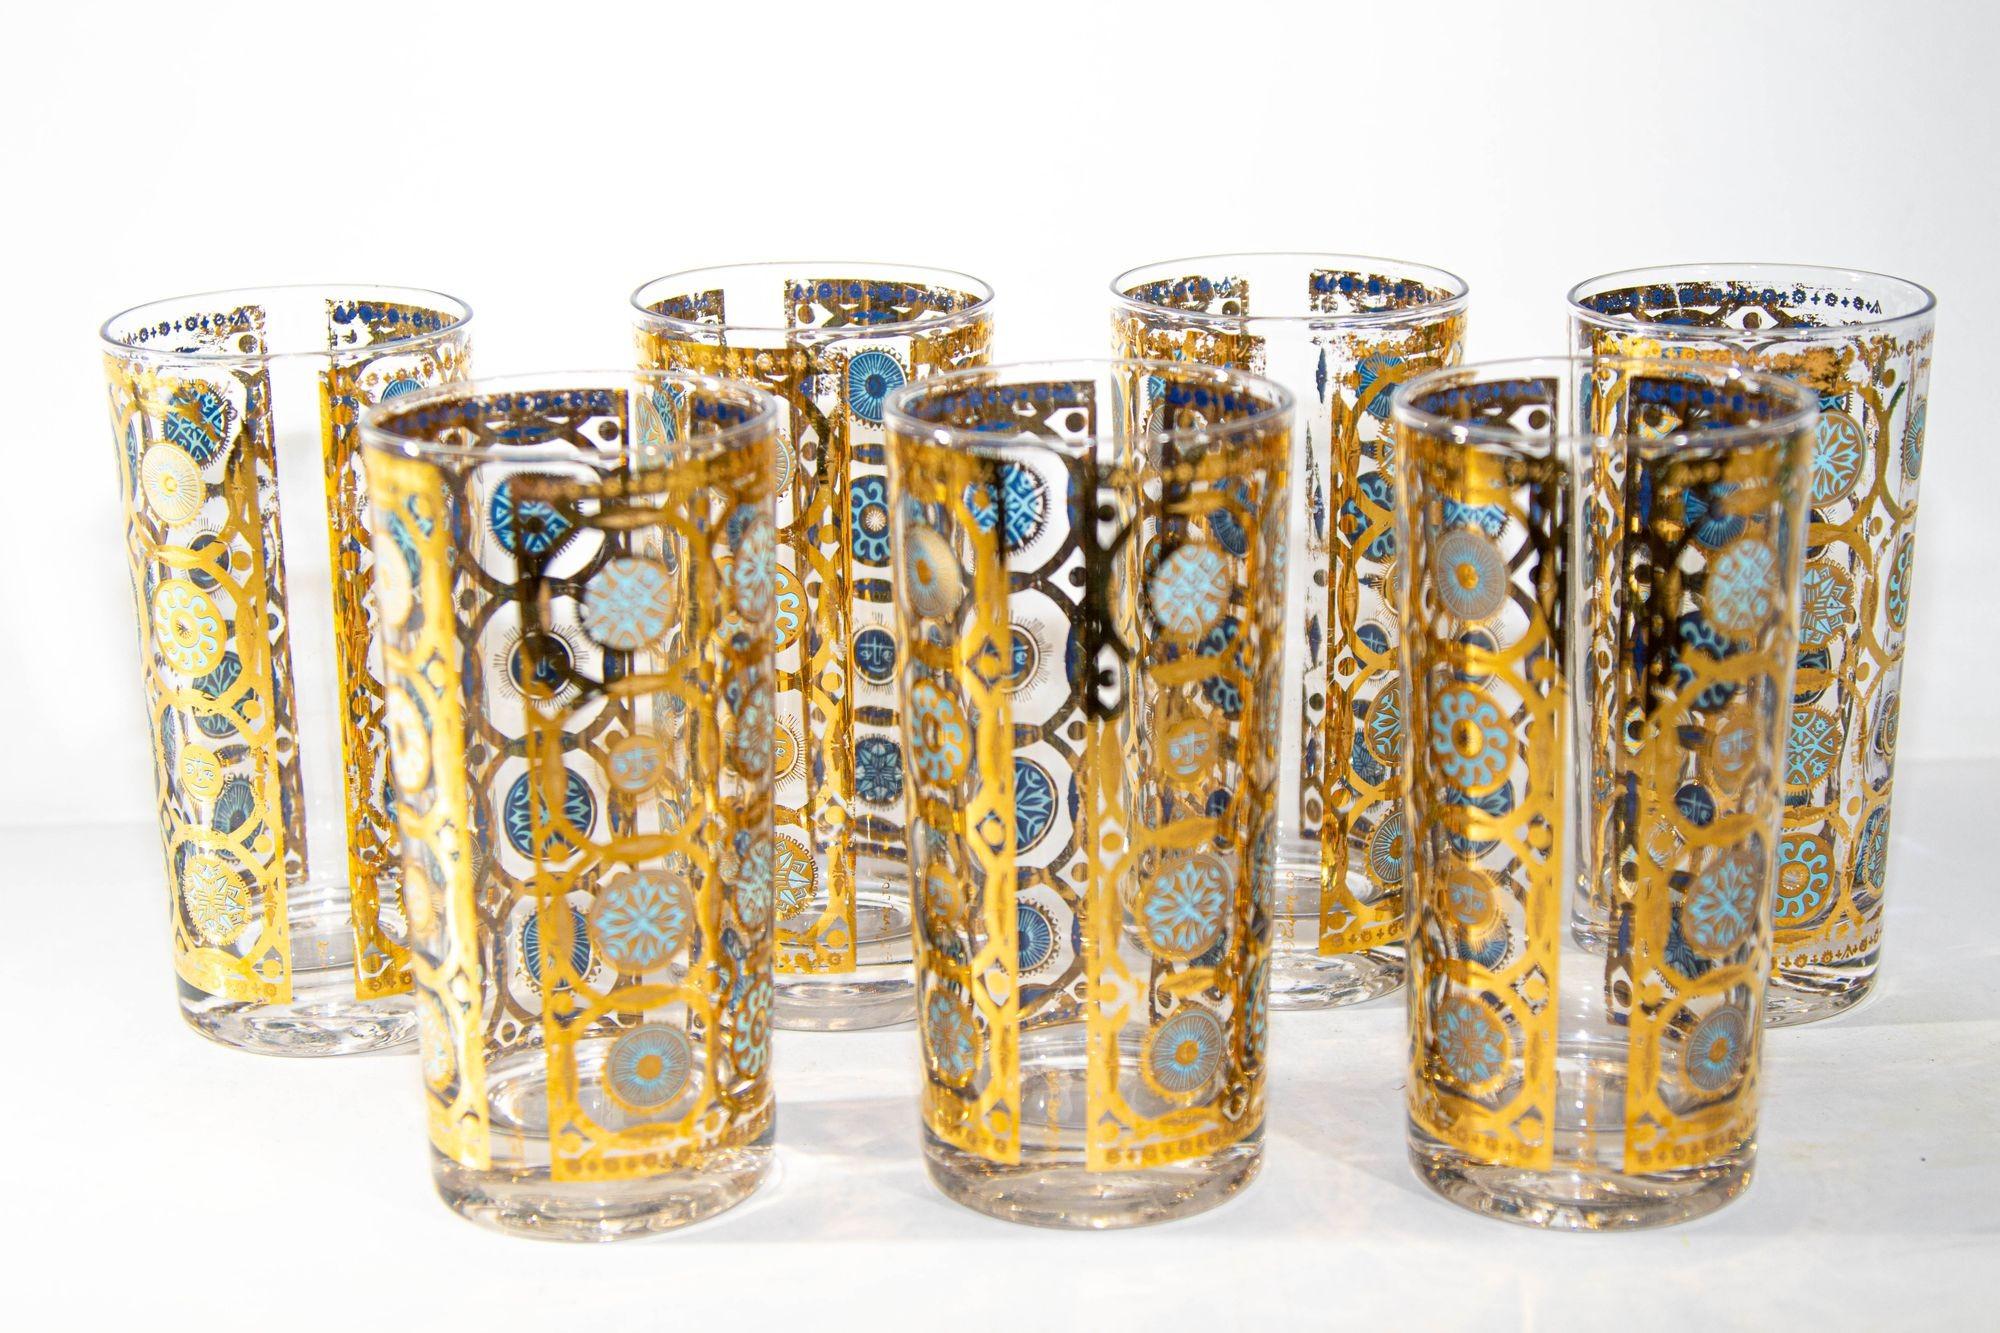 Art Glass Culver Ltd 22k Gold and Turquoise Signed Glassware Barware Set of 7, circa 1960s